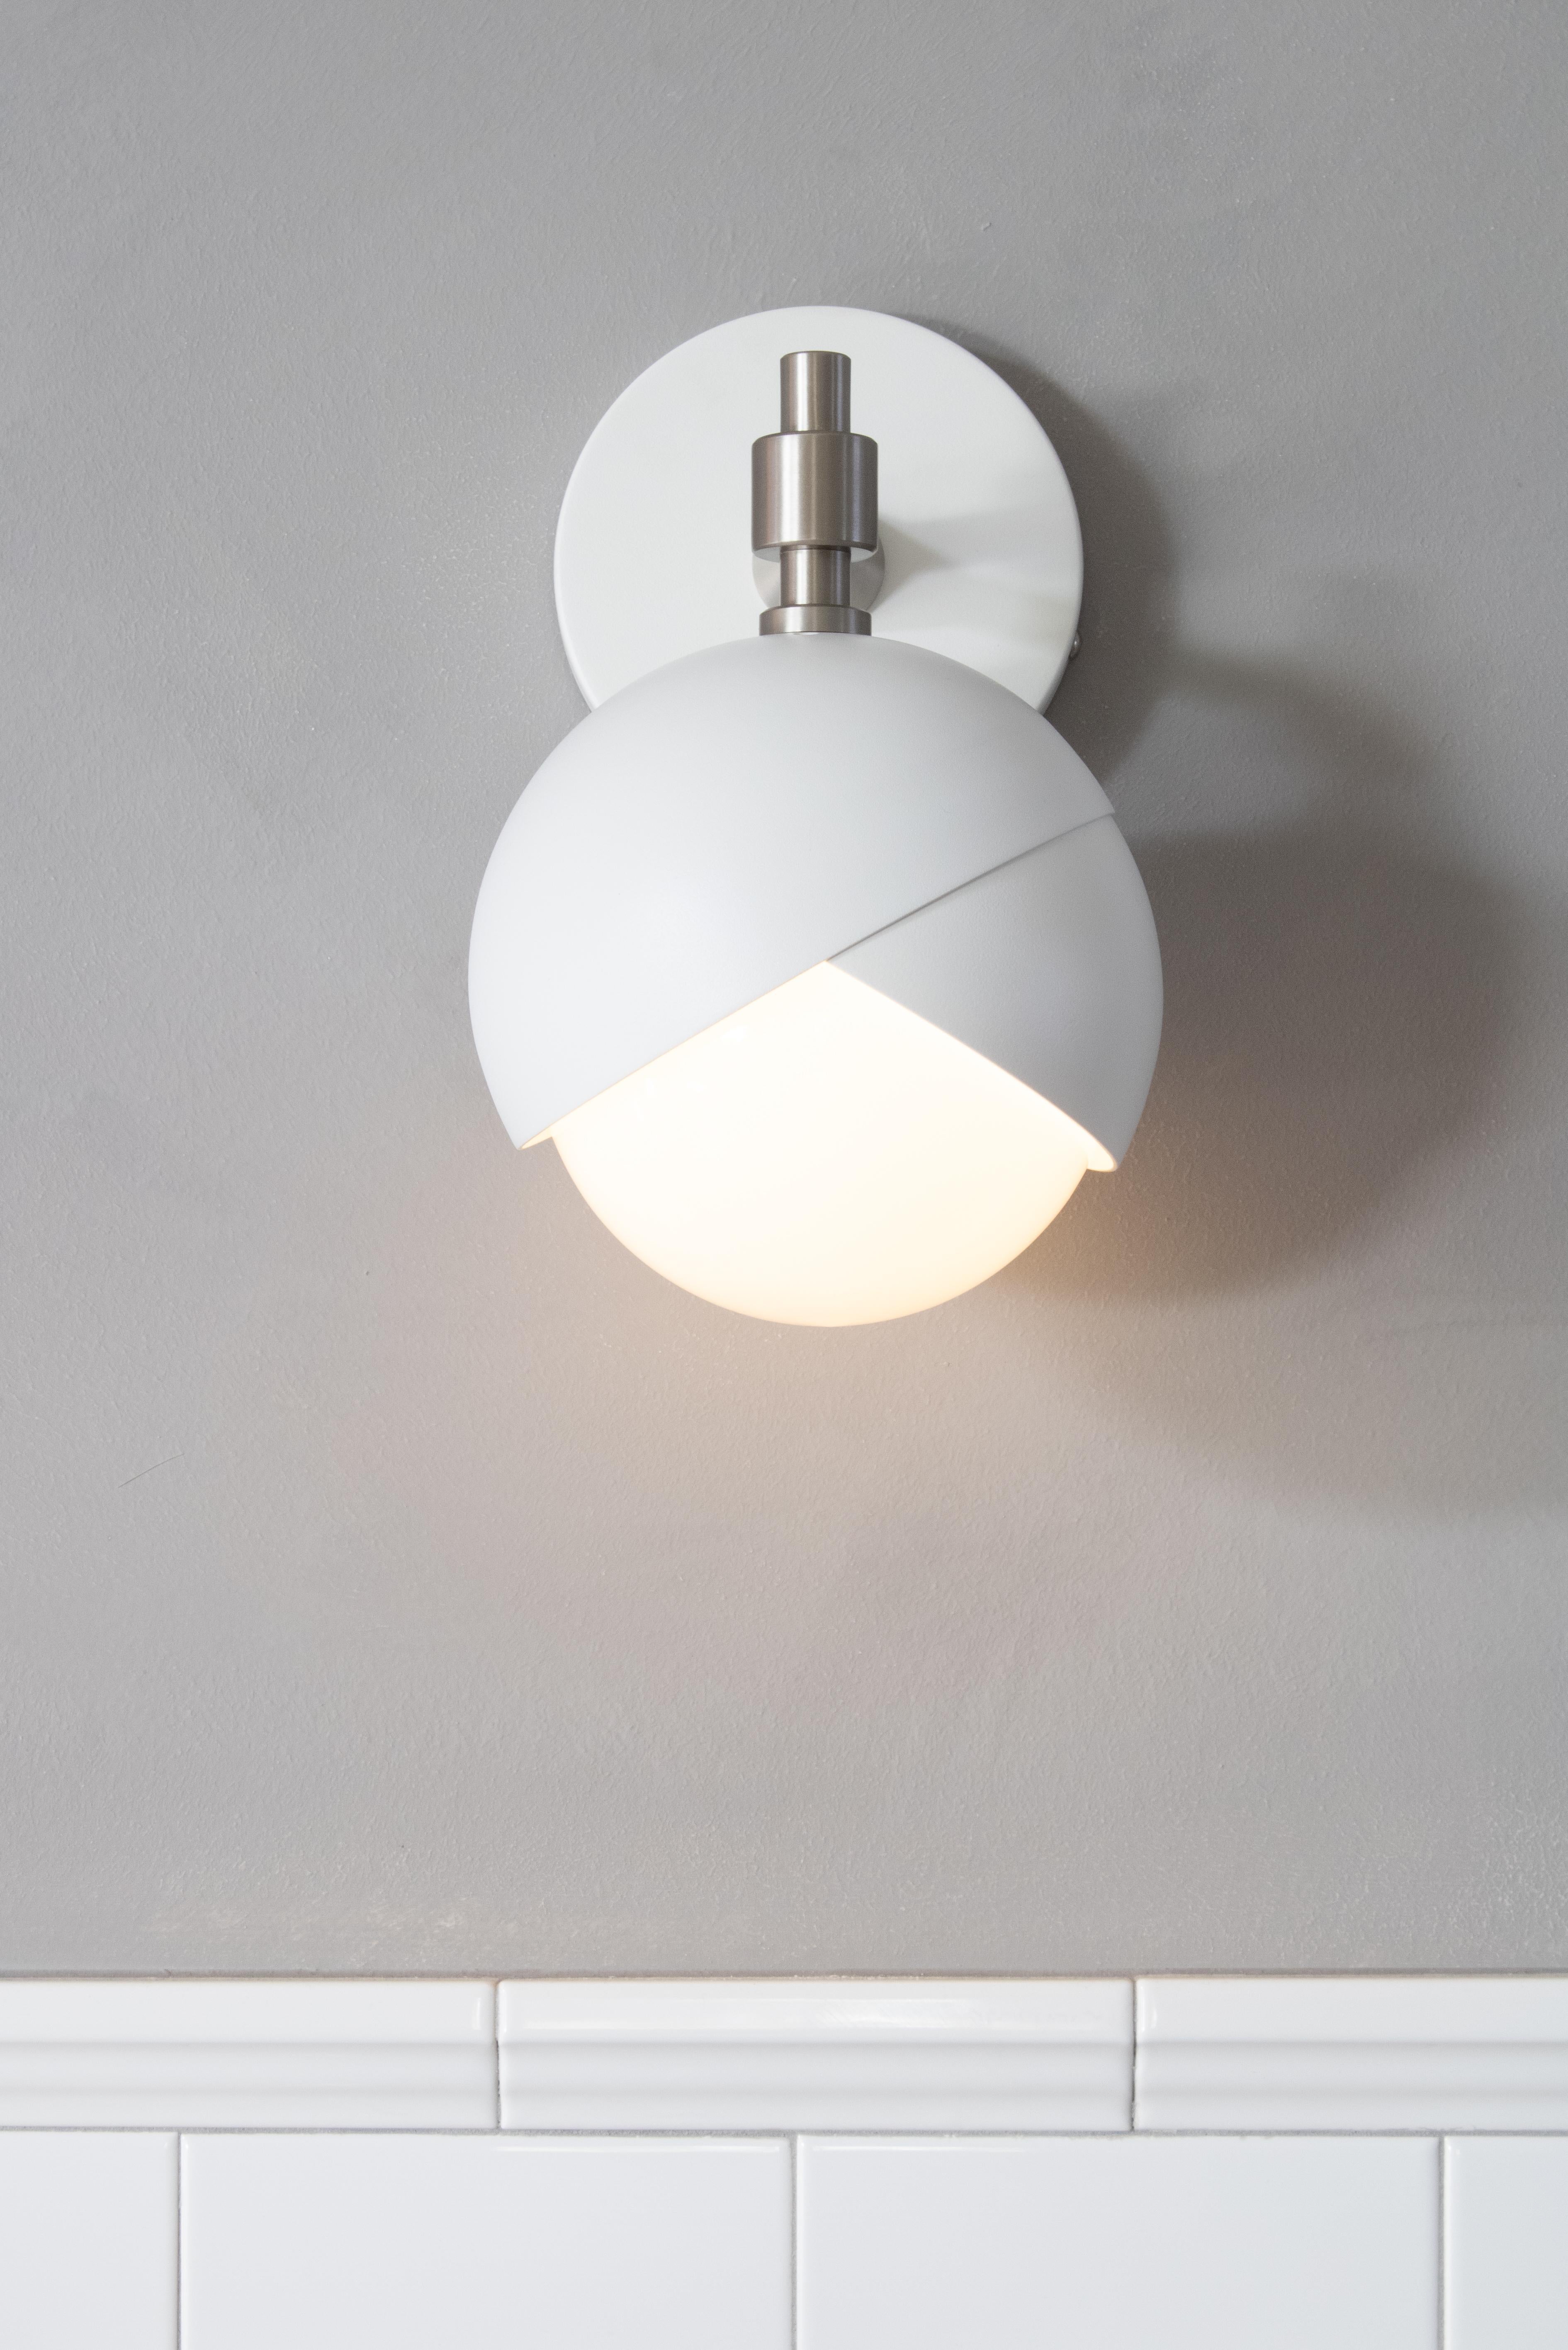 Available in the full range of our signature finishes, the Benedict™ Simple Sconce is sure to be the stunning accent your project has been looking for. Shown here in Matte White Powder Coat and Satin Nickel 

LAMPING:
Provide Bulb: (1) 5W Candelabra